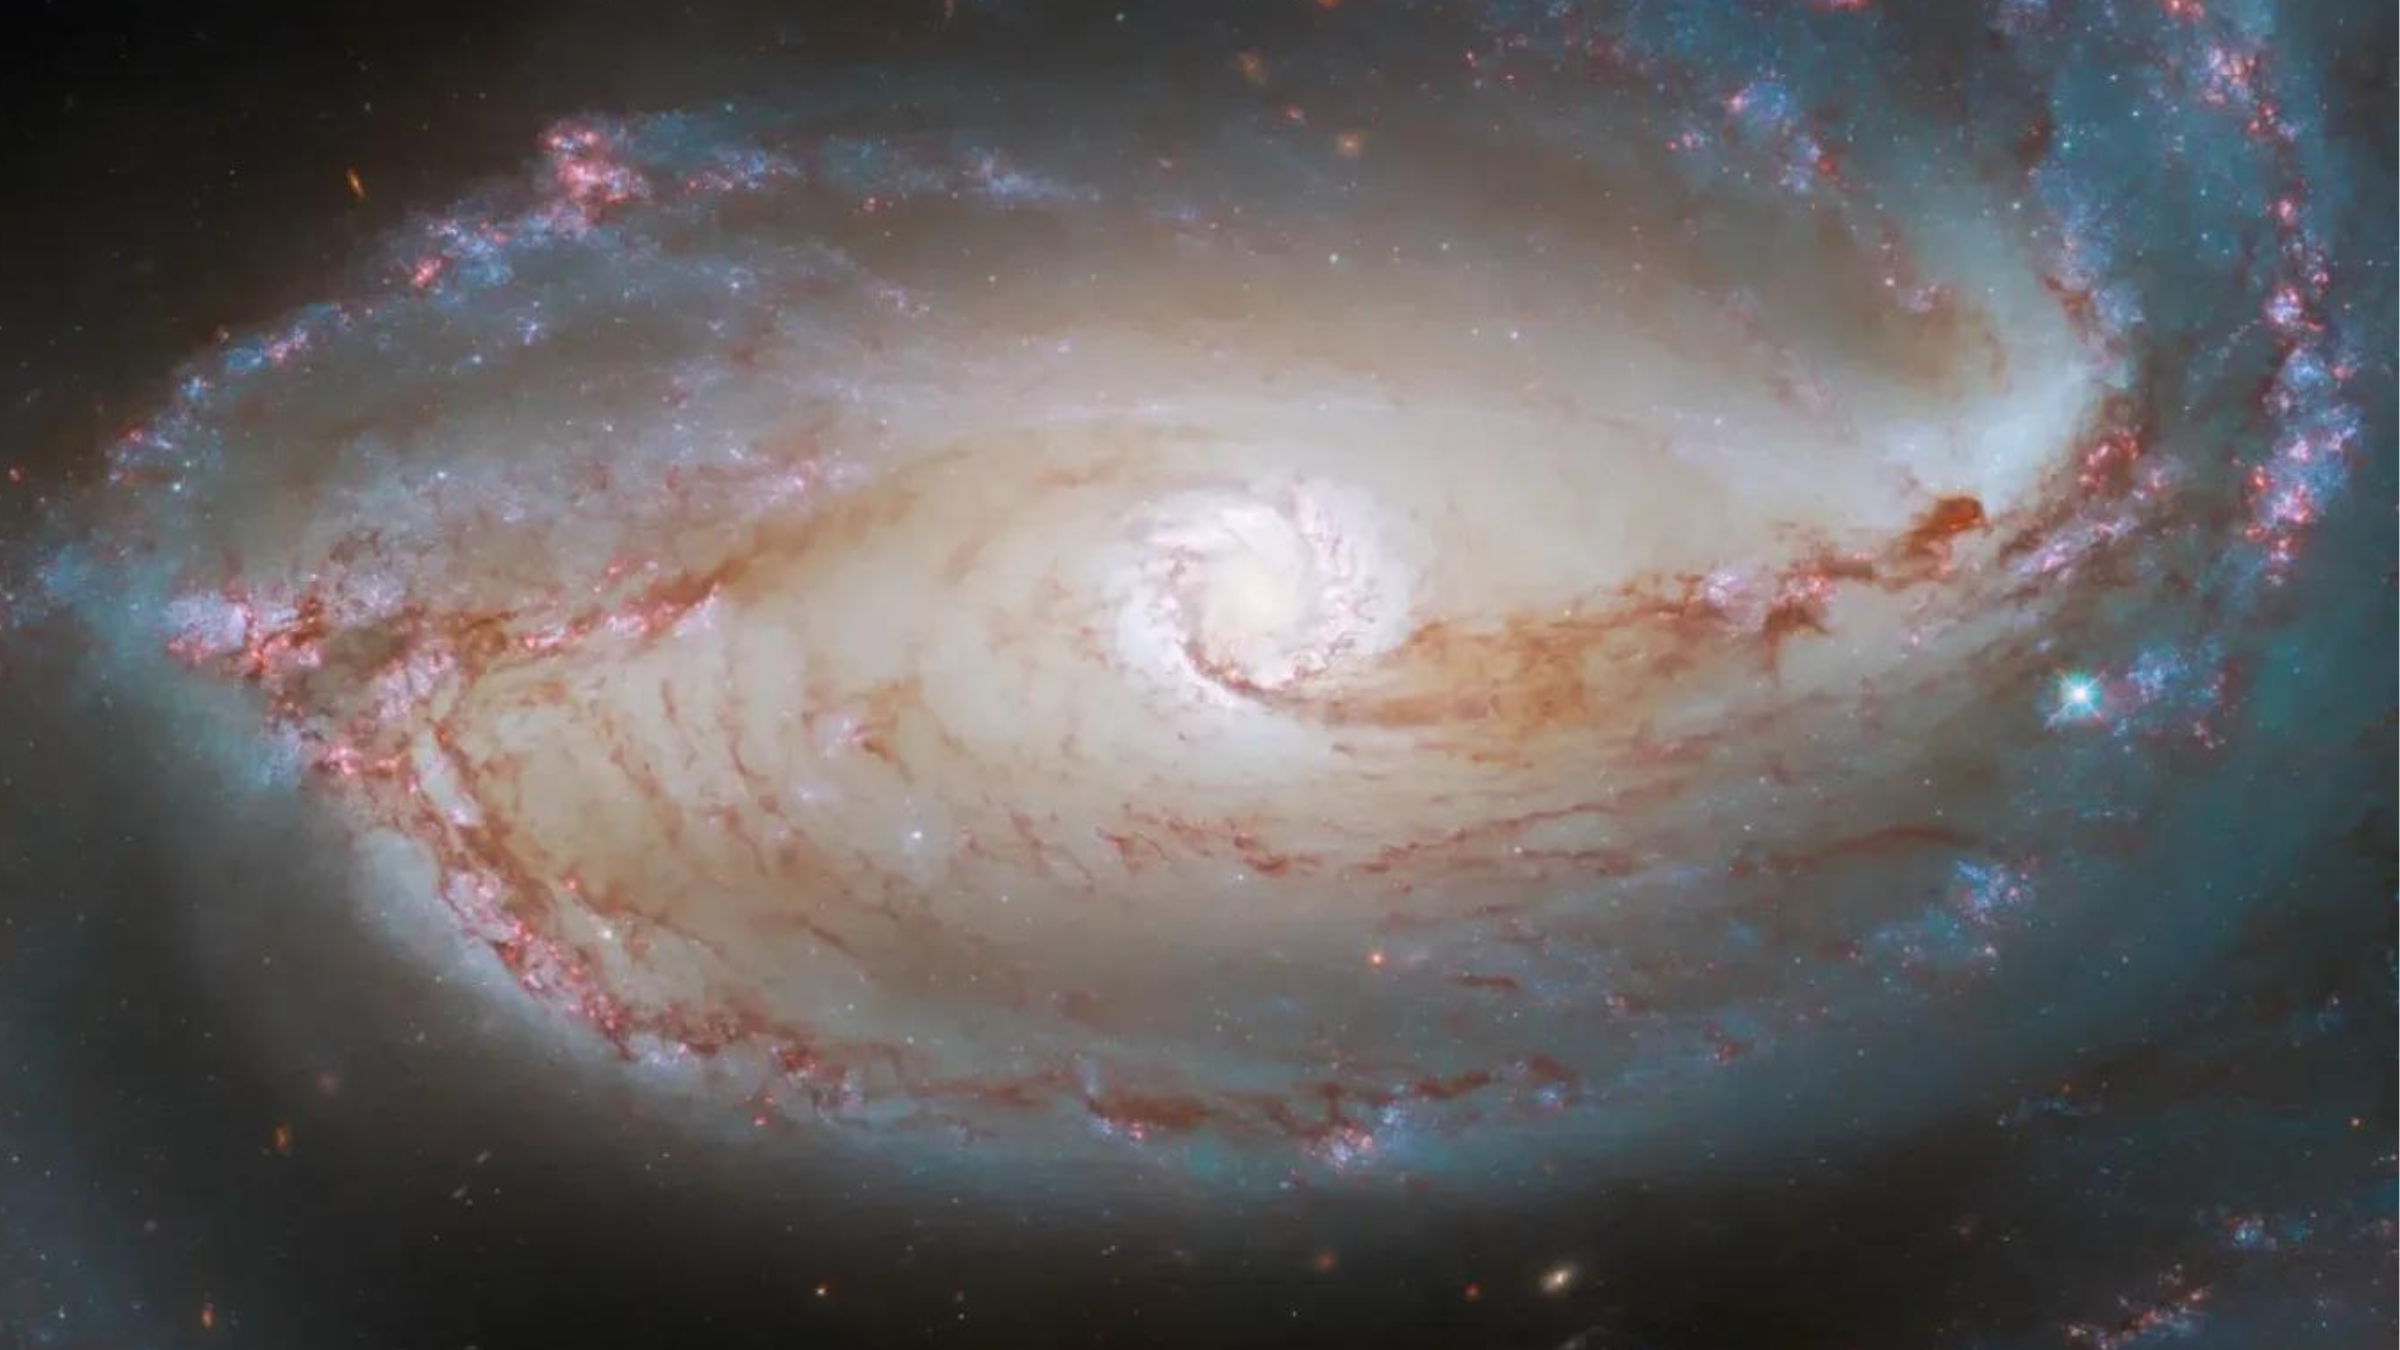 This image shows the heart of the barred spiral galaxy NGC 1097, as seen by NASA’s Hubble Space Telescope.